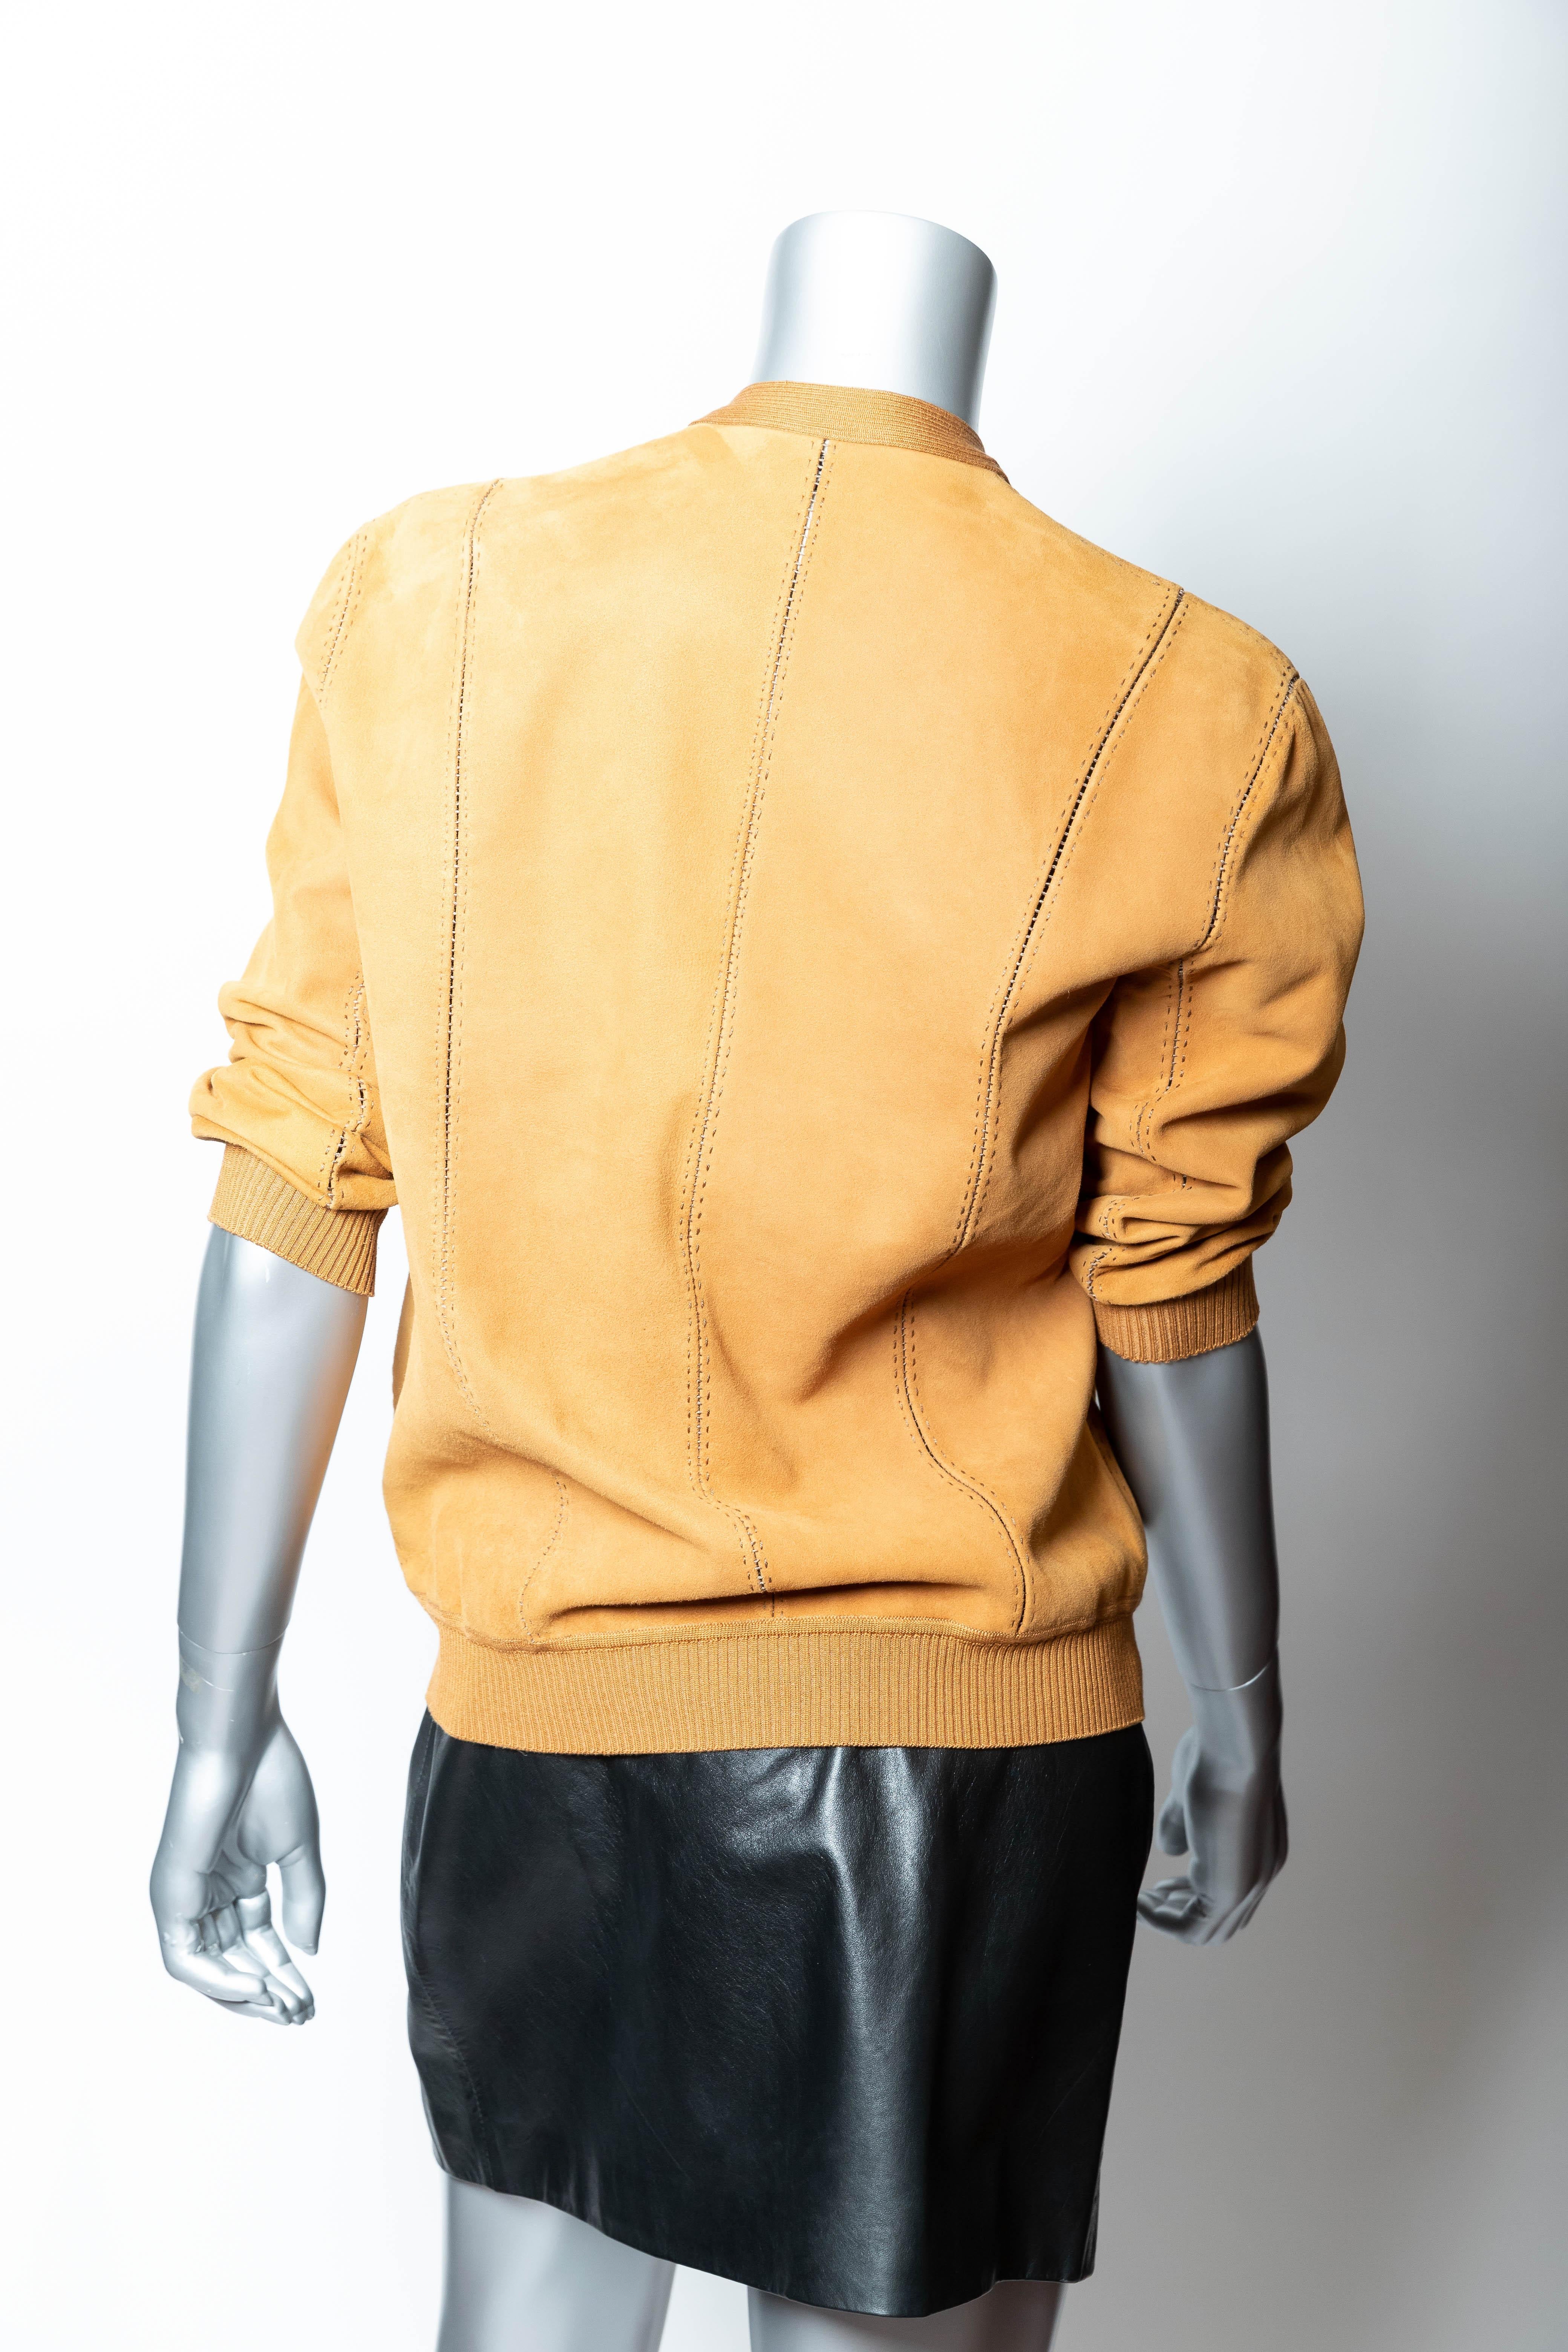 Wonderful Hermes Suede Jacket / Top in Butterscotch.
Reminiscent of the golf sweaters worn in the 1970s.
3/4 sleeves.
Ribbed trim to hem, center and cuffs.
Very good condition. 
